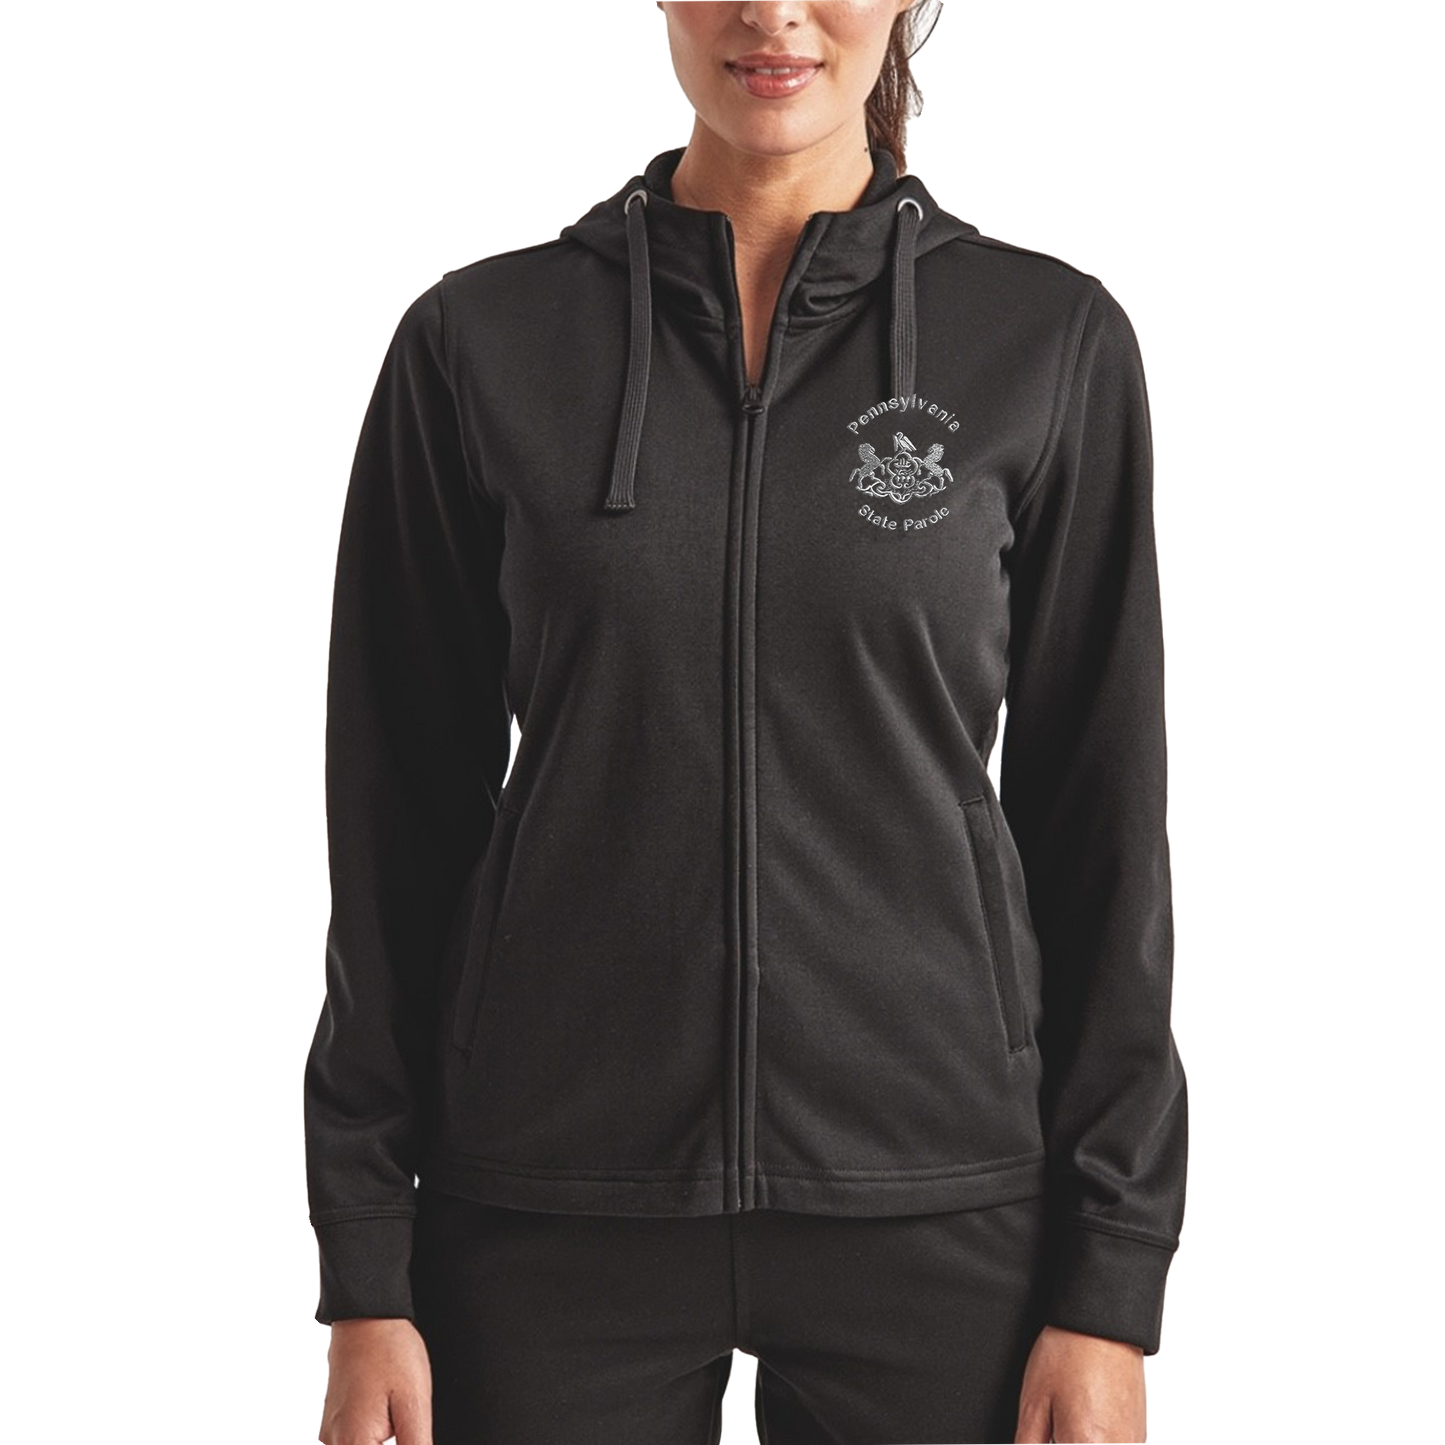 Ladies' Performance Hooded Sweatshirt with Embroidered State Parole Agent Logos (Various Colors)